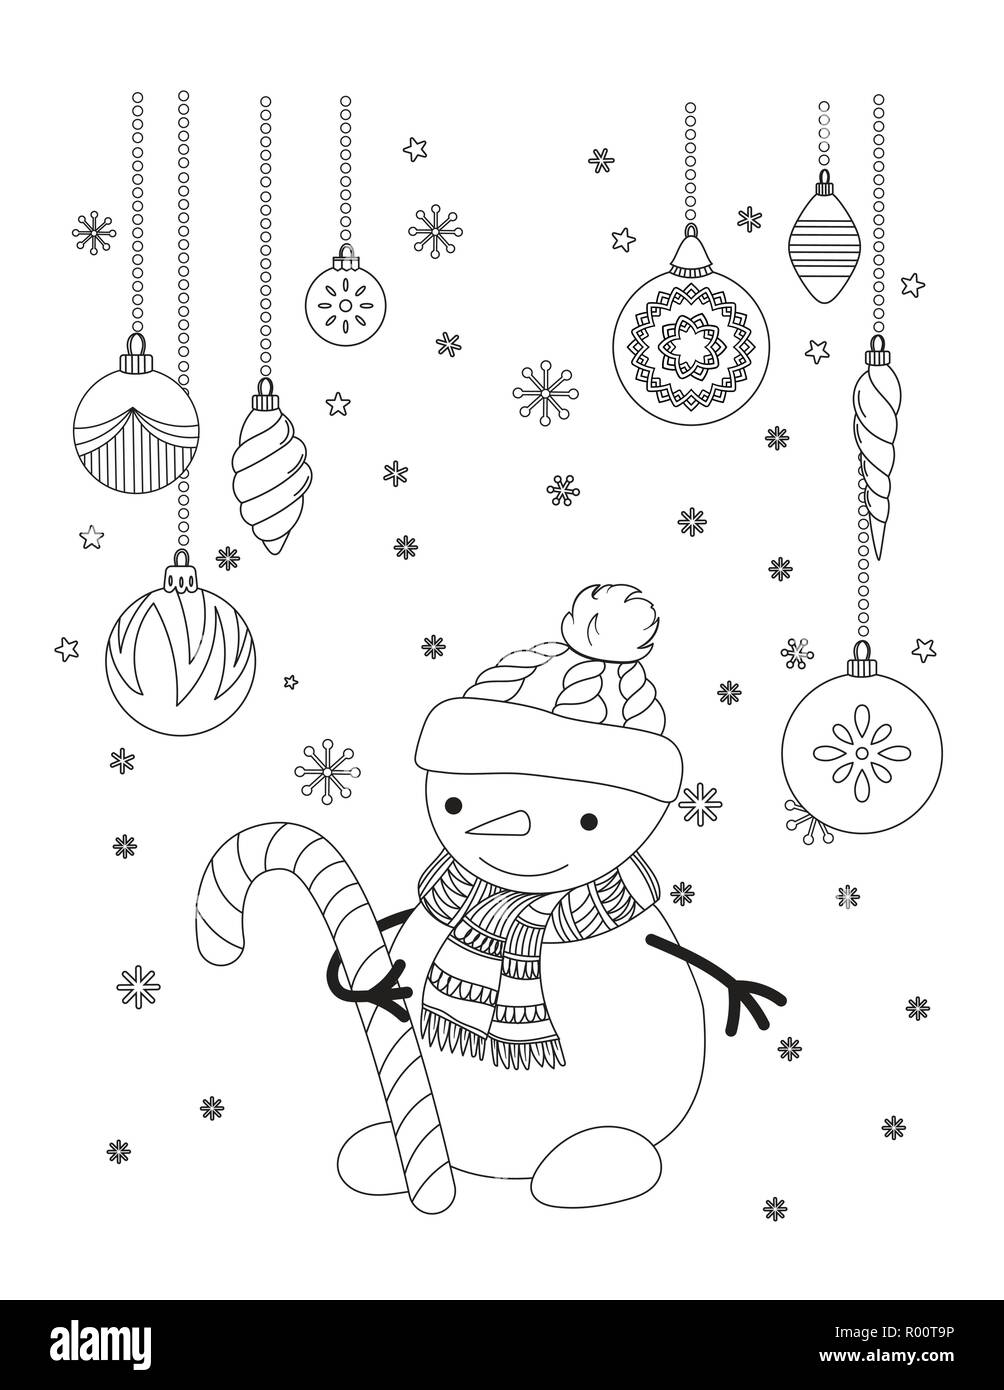 https://c8.alamy.com/comp/R00T9P/christmas-coloring-page-for-kids-and-adults-cute-snowman-with-scarf-and-knitted-cap-hand-drawn-vector-illustration-R00T9P.jpg